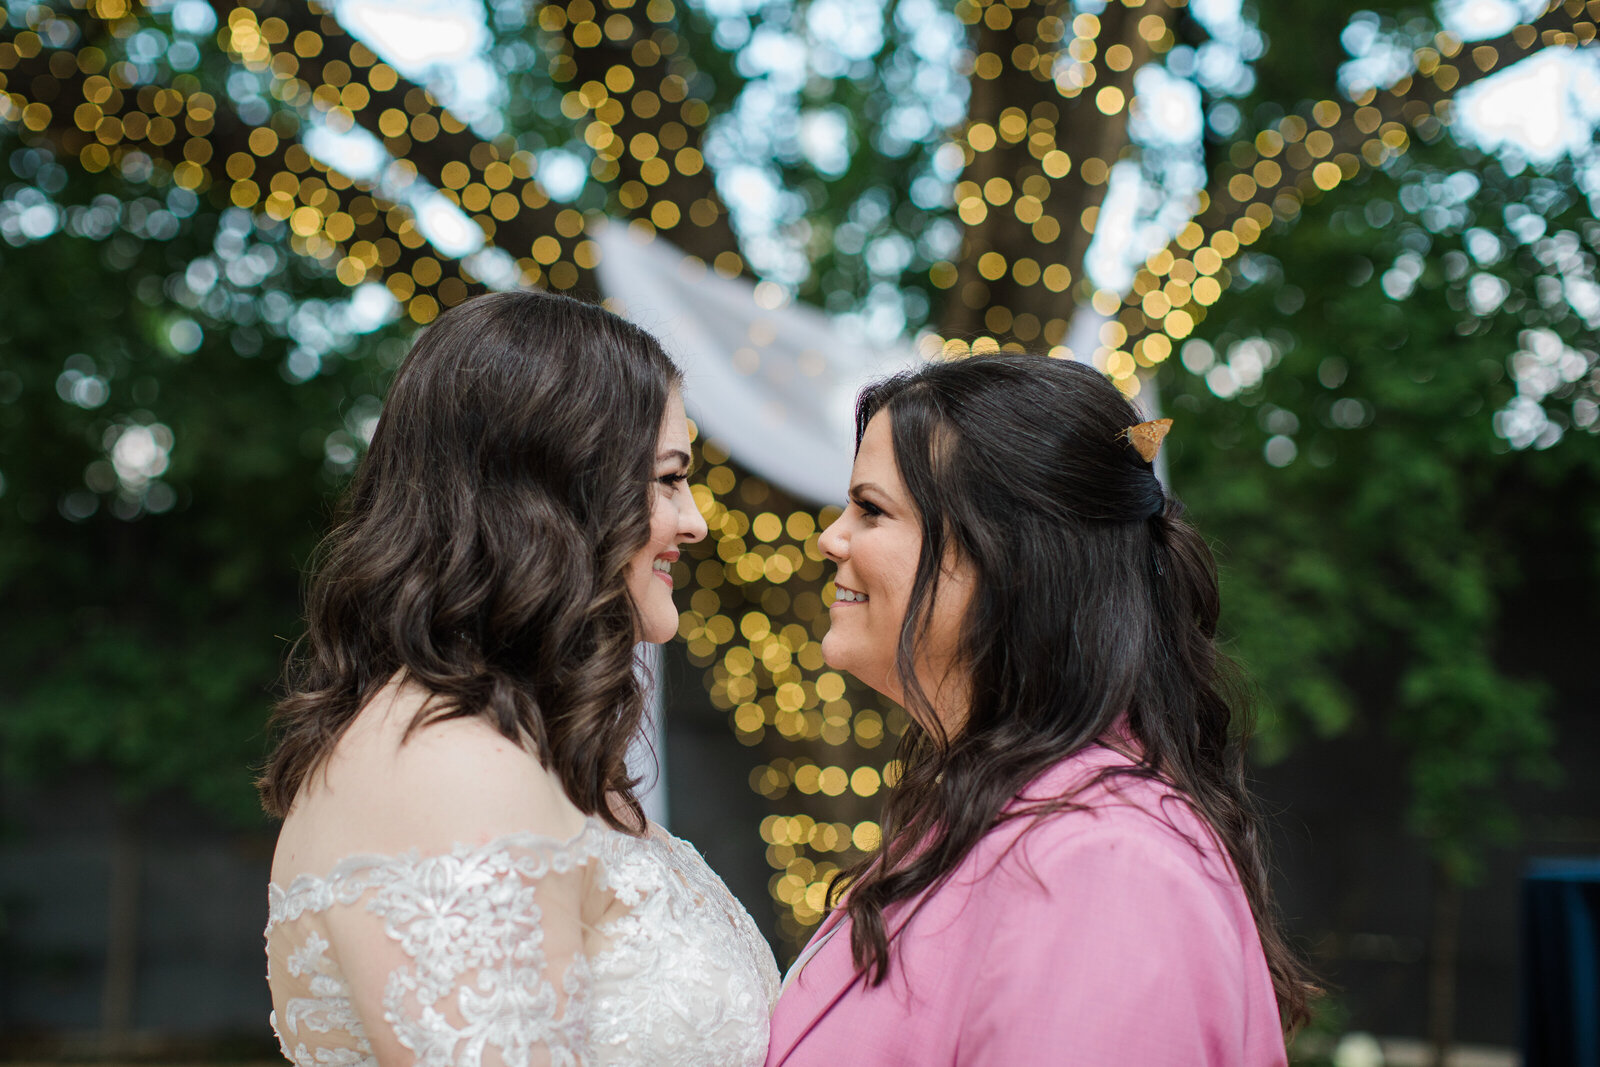 Two brides look at each other in front of a big oak tree covered in twinkle lights at Artspace 111 venue in Fort Worth, Texas. The bride on the left is wearing a long sleeve lace white dress. The bride on the right is in a pink suit. They both have brown hair, and the bride with the pink suit has an orange monarch butterfly in her hair.